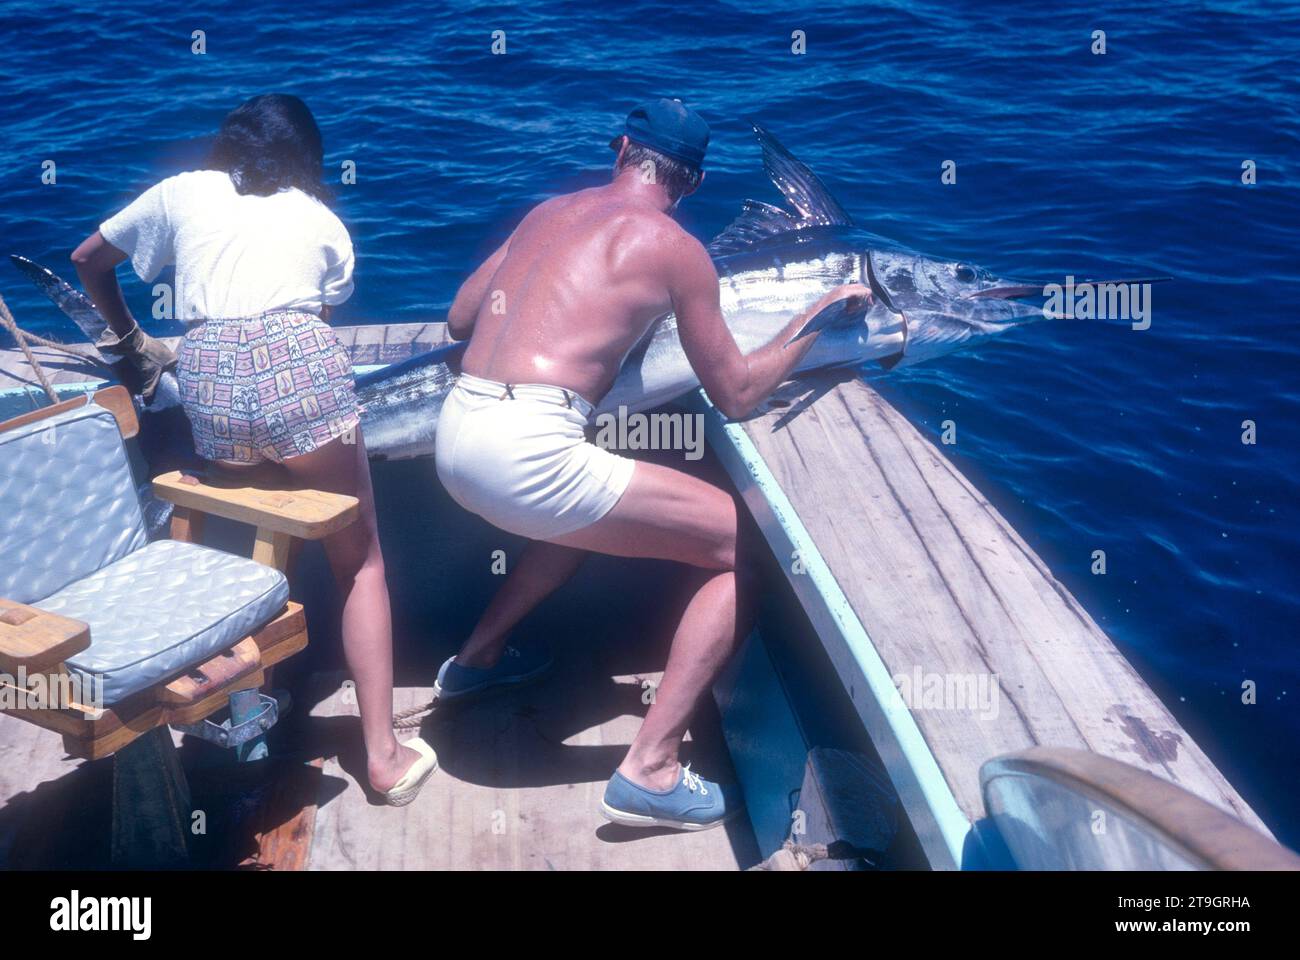 BAJA CALIFORNIA, MEXICO - JUNE, 1962:  Actor and former baseball player Chuck Connors (1921-1992) and actress fiance Kamala Devi (1934-2010) pull a marlin on the boat while on a fishing trip circa June, 1962 in Baja California, Mexico.  (Photo by Hy Peskin) *** Local Caption *** Kamala Devi;Chuck Connors Stock Photo